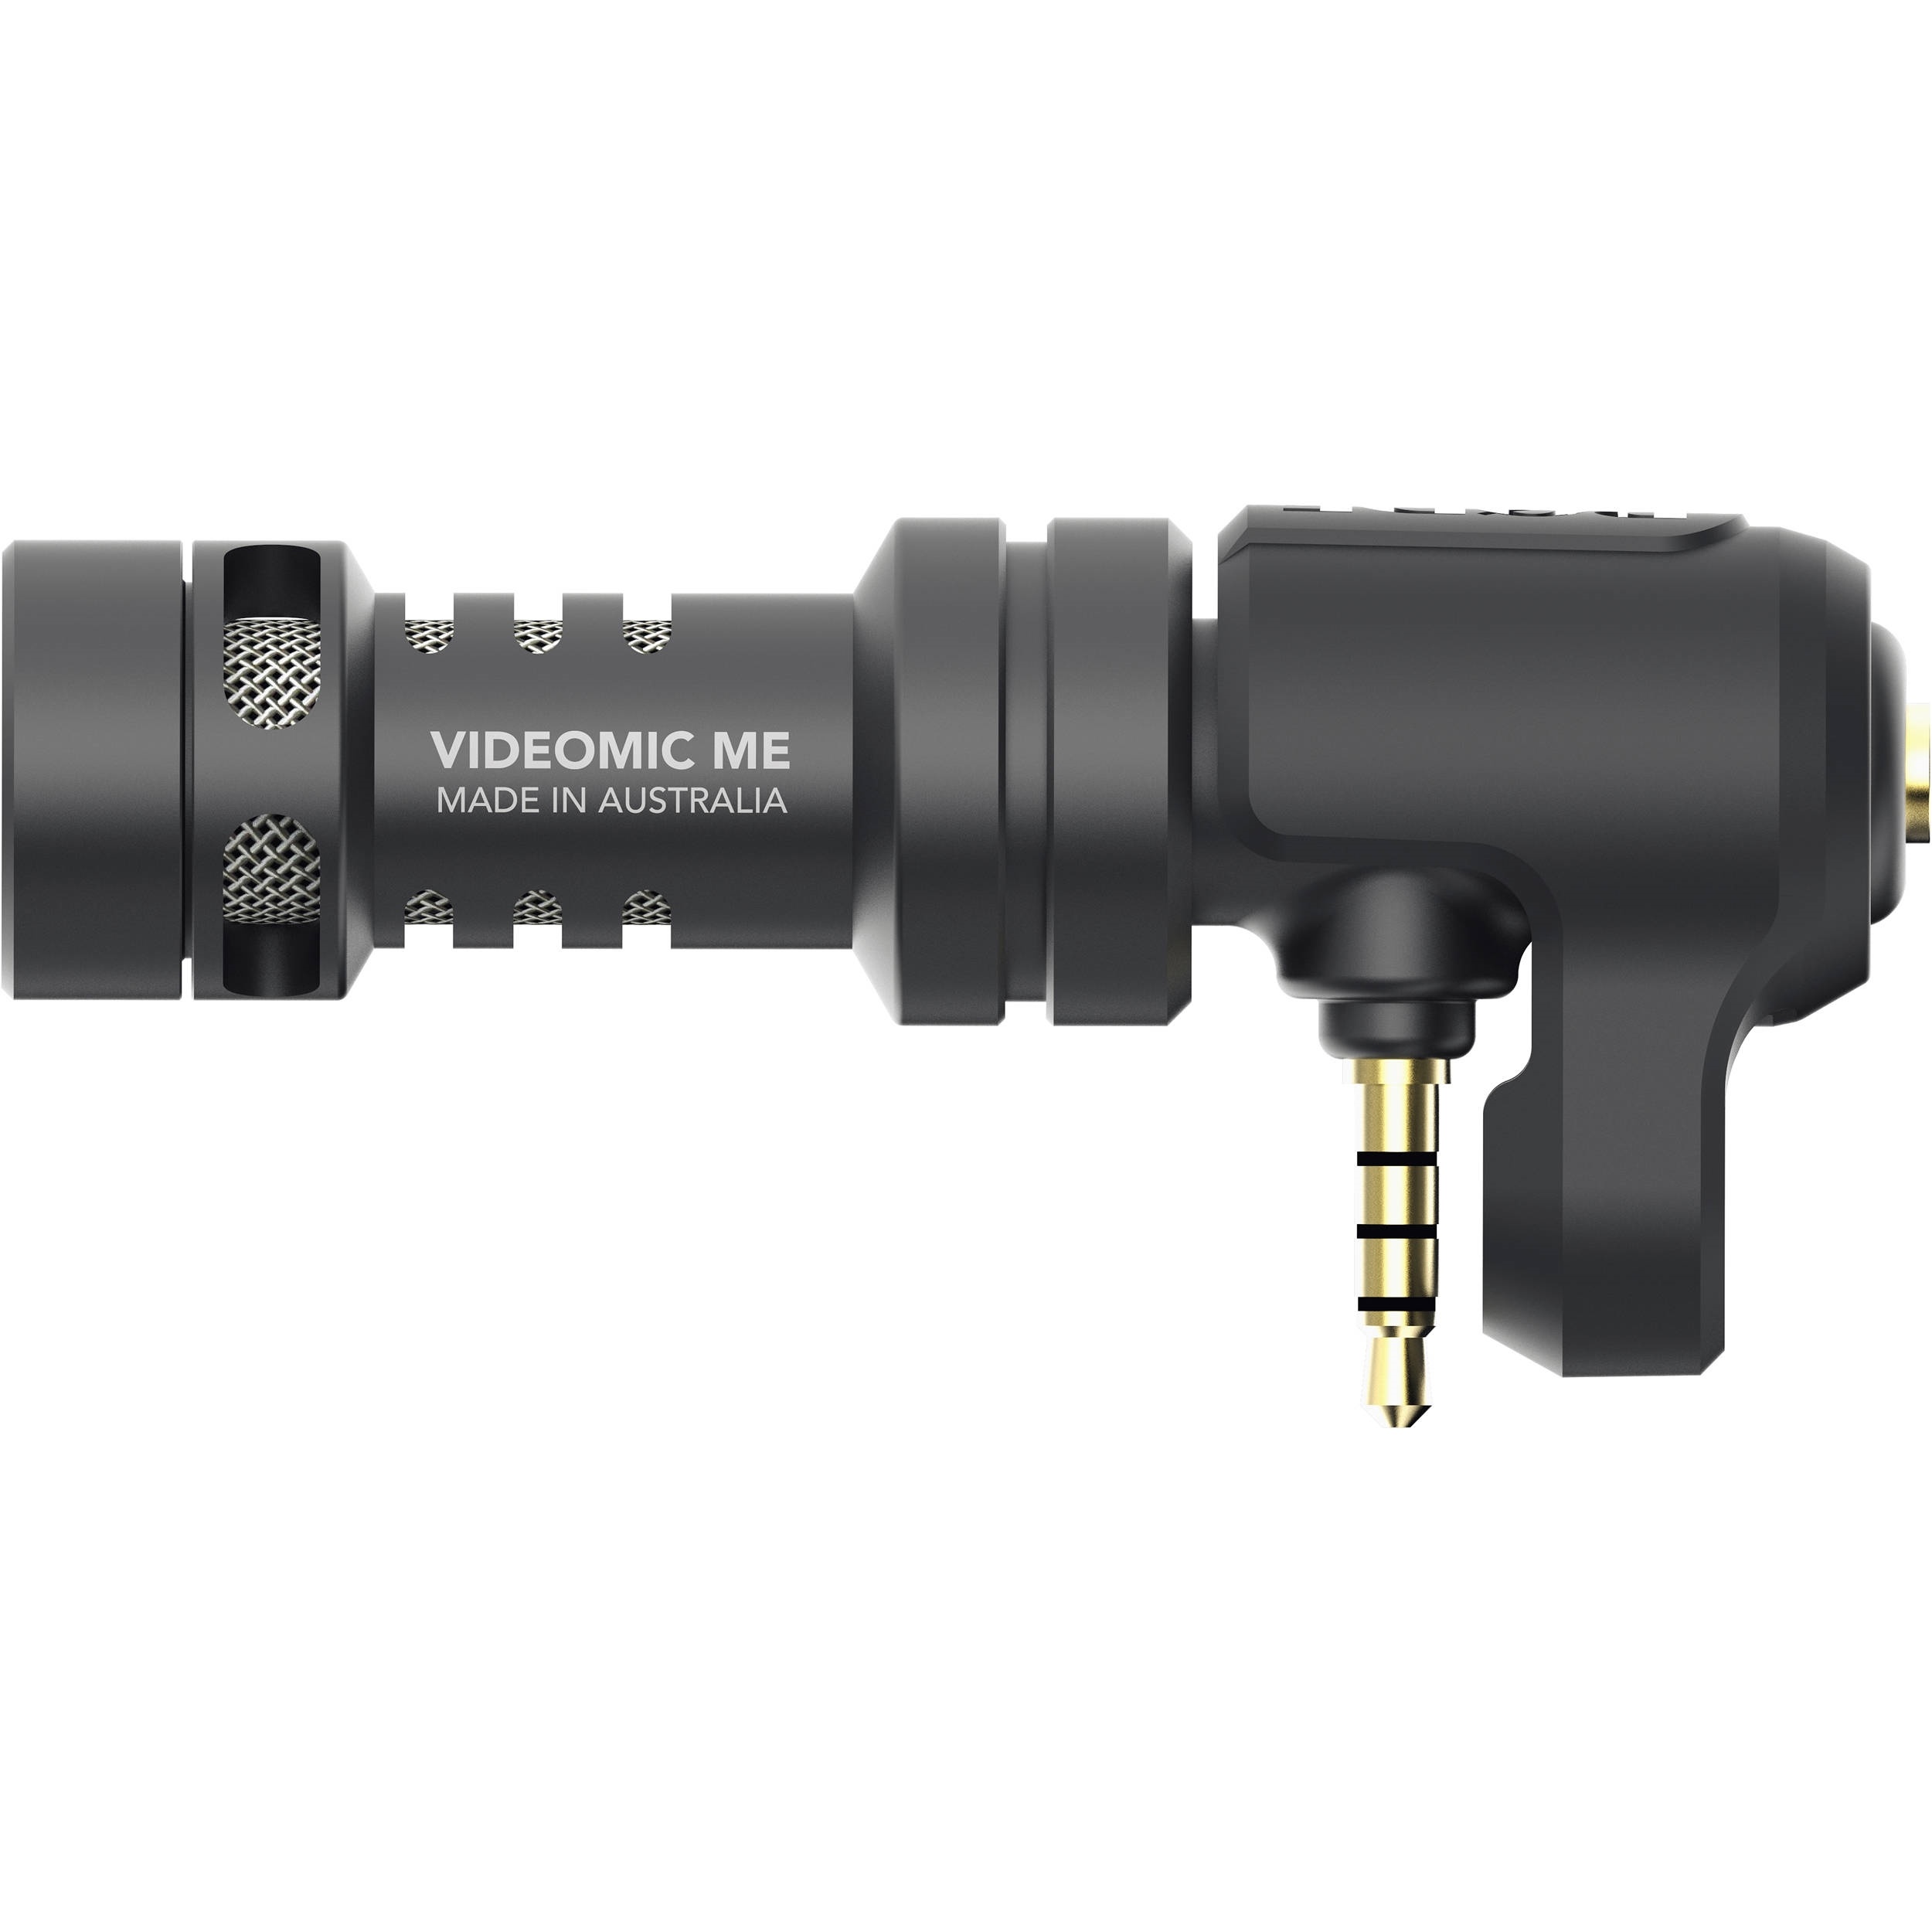 Rode VideoMic Me - Open Box Special